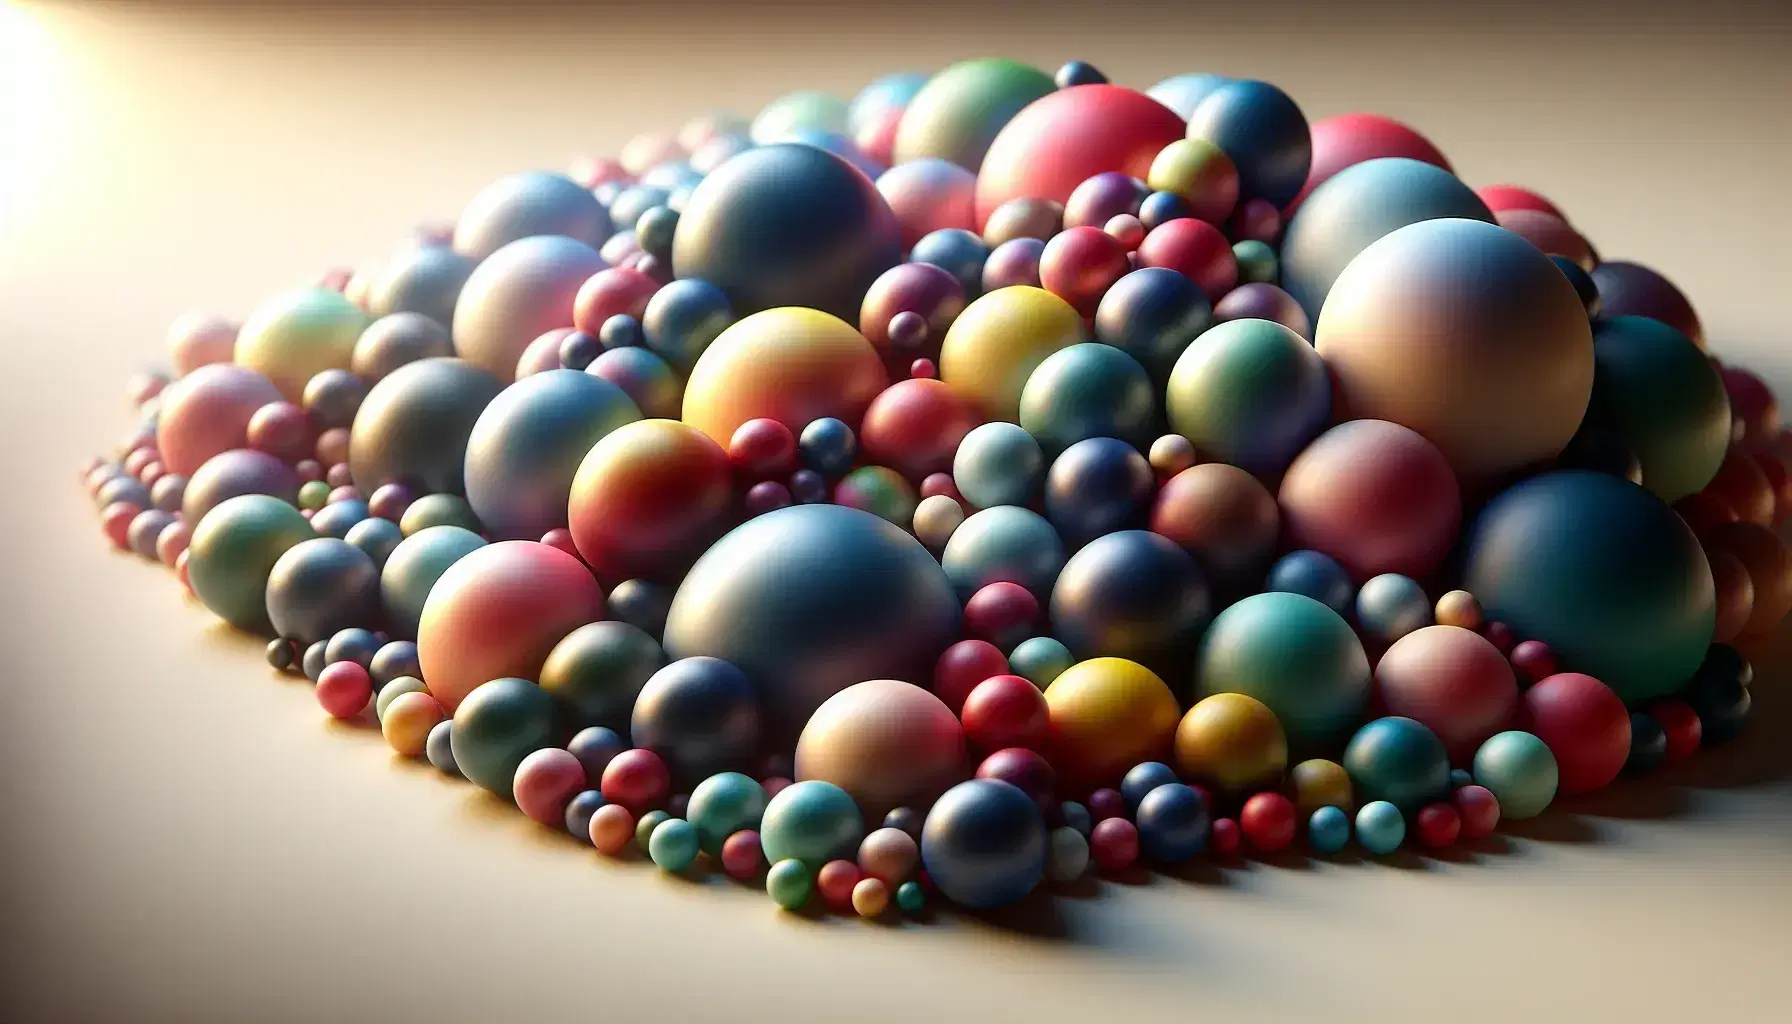 Colored three-dimensional spheres on a neutral surface with soft light effects and delicate shadows, randomly arranged and without symbols.